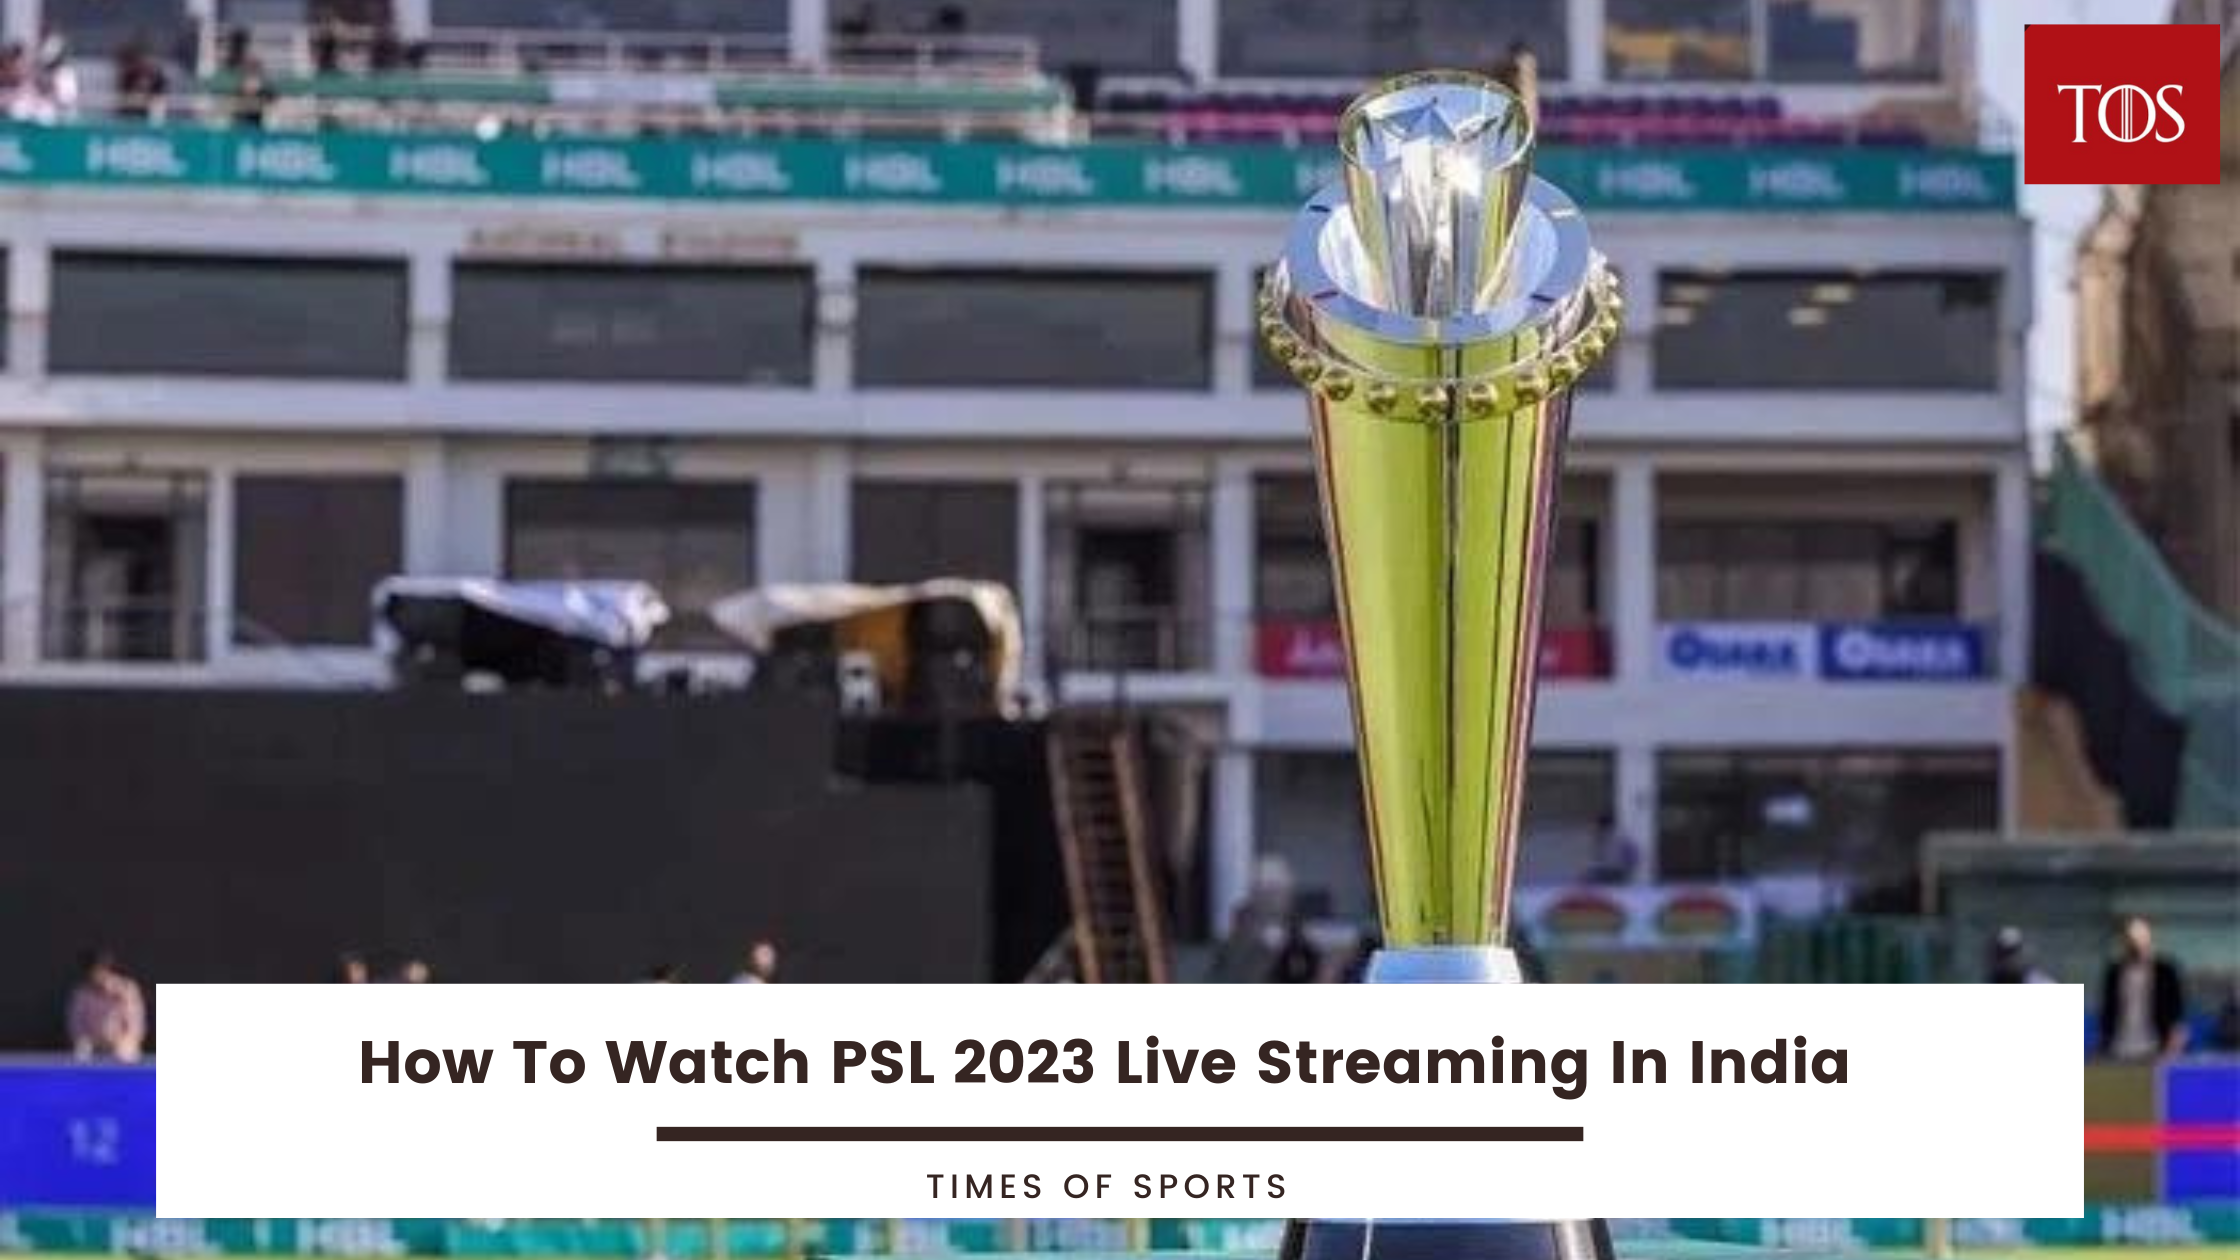 How To Watch PSL 2023 Live Streaming In India